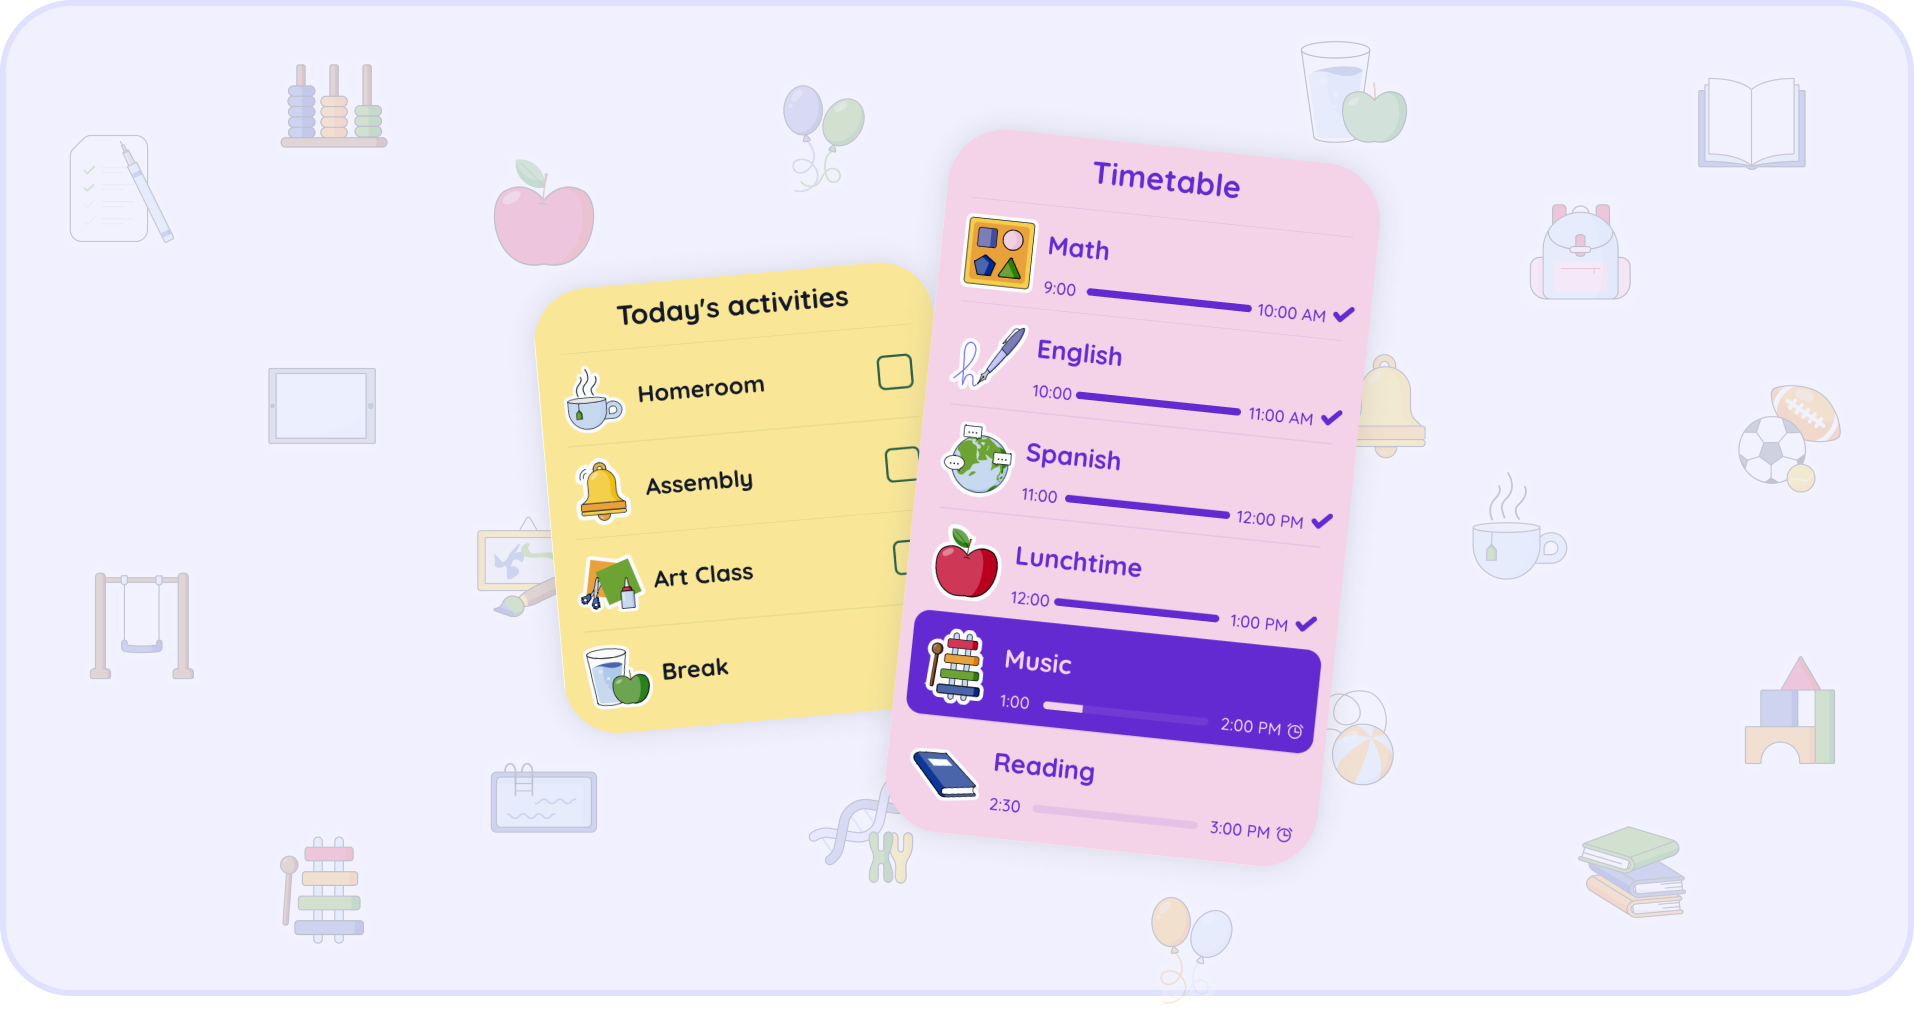 This image shows the new Timetable widget available on Classroomscreen, as well as some of the icons available for use within the widget.